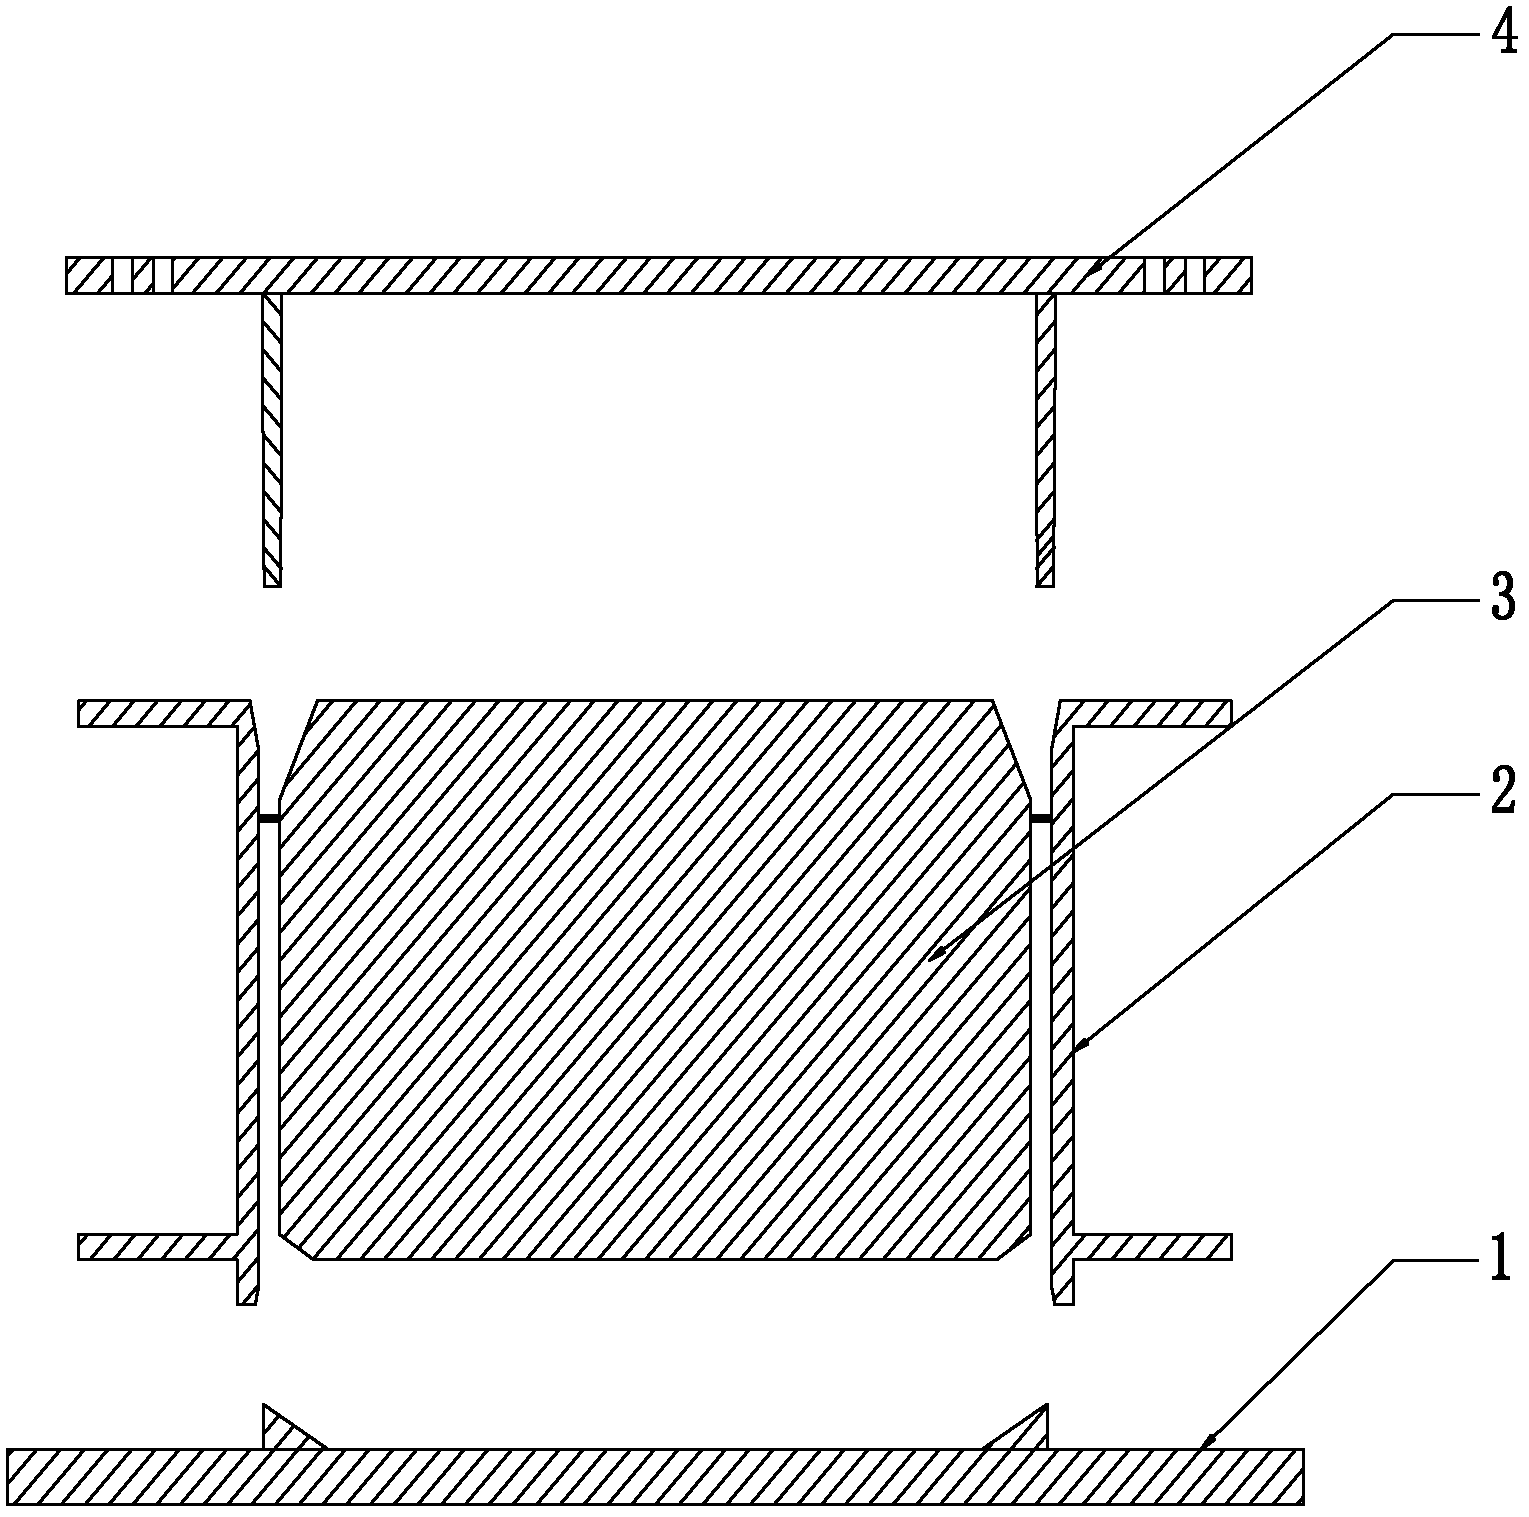 A method of making a cavity component using a mechanical mold system